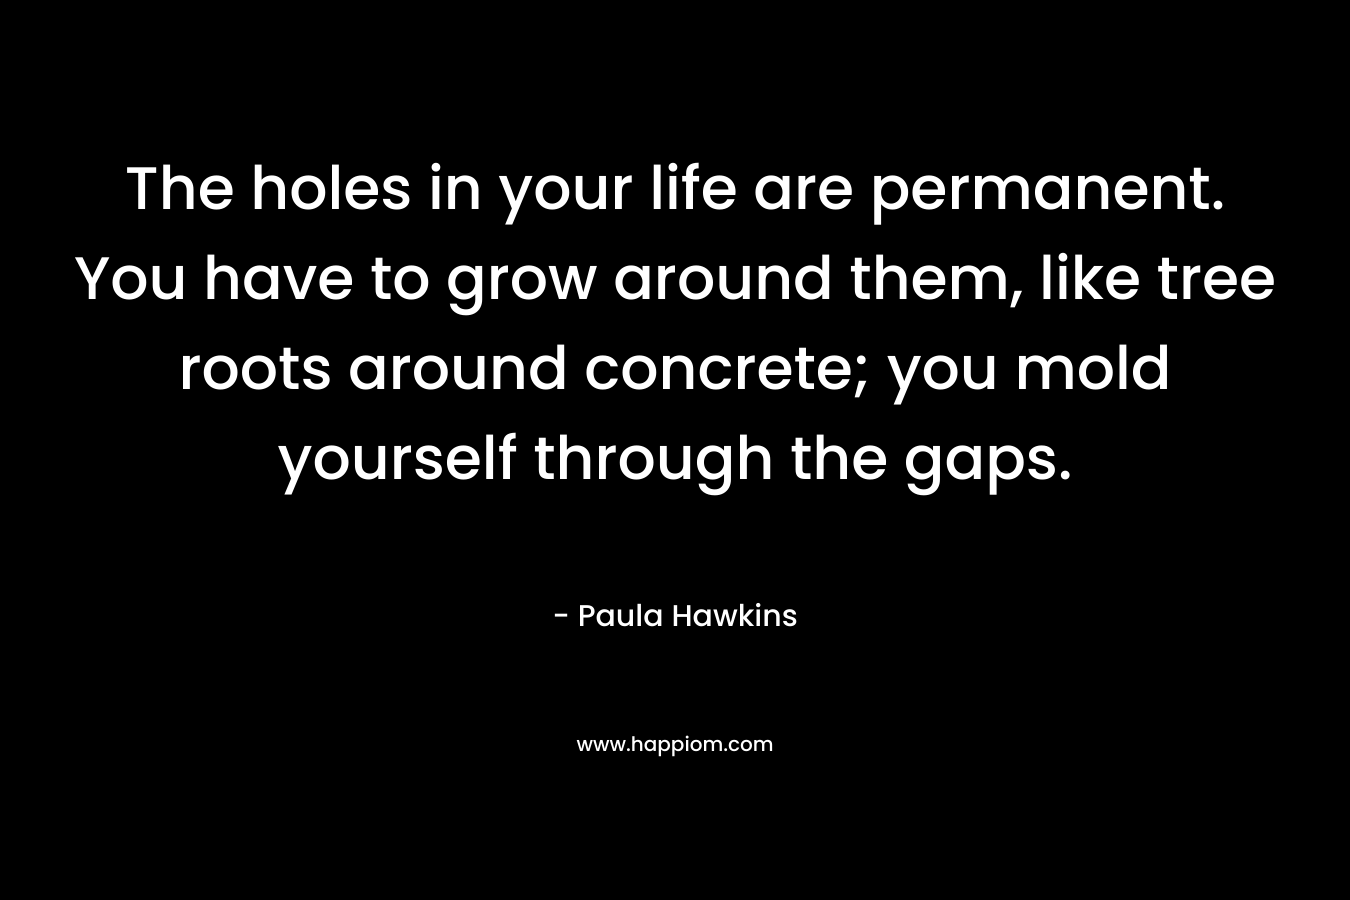 The holes in your life are permanent. You have to grow around them, like tree roots around concrete; you mold yourself through the gaps.